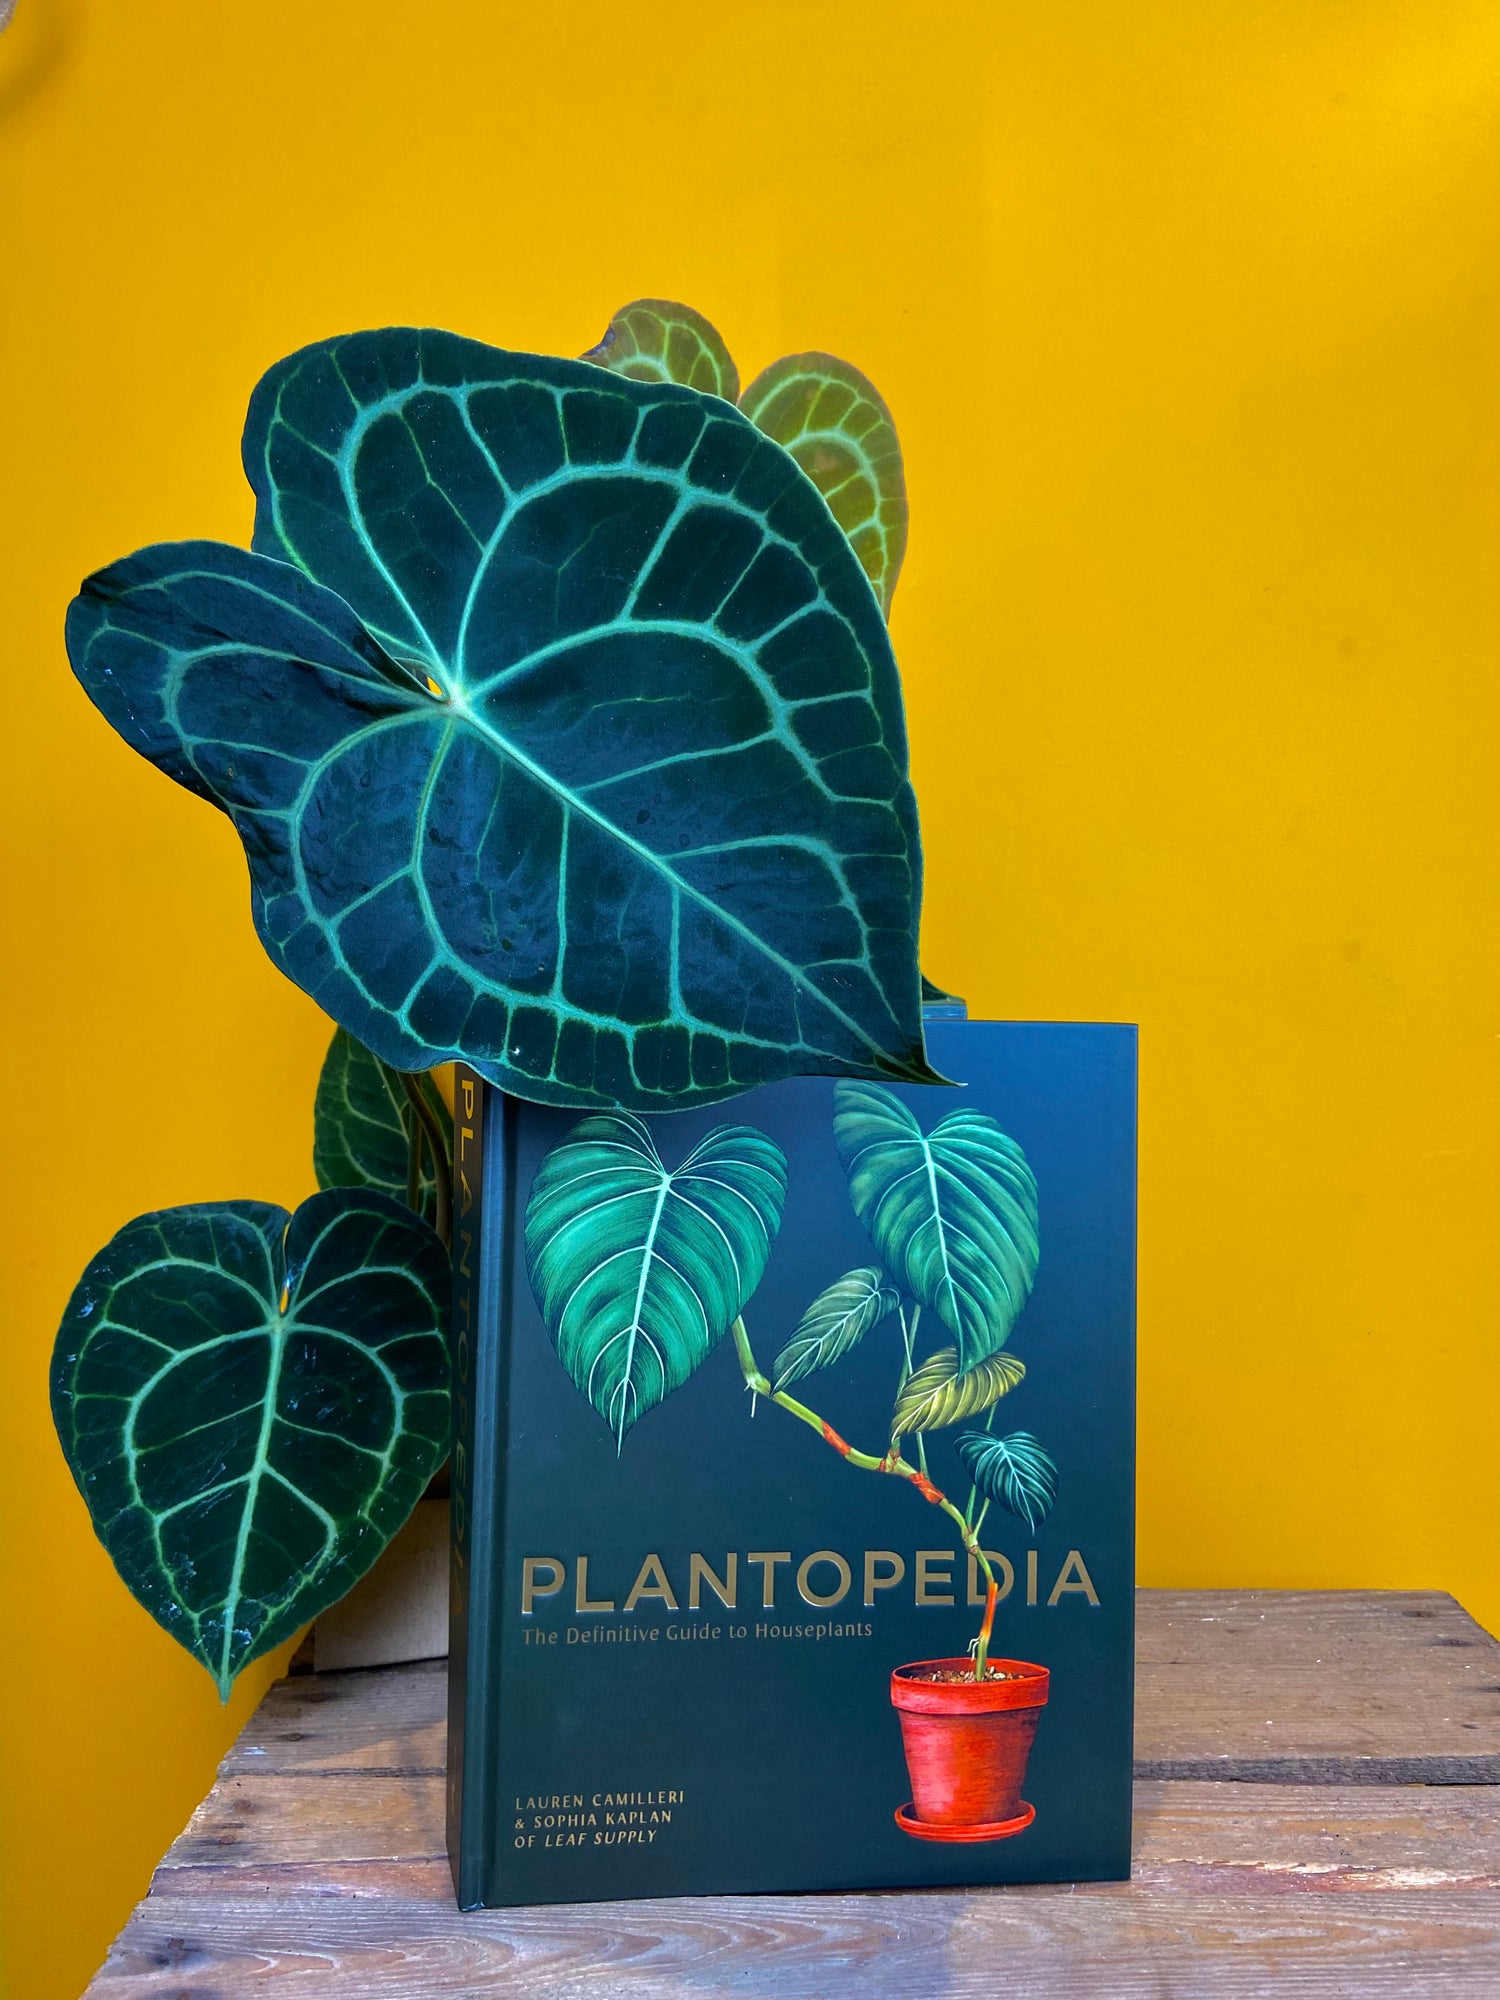 A Plantopedia book by Lauren Camilleri and Sophia Kaplan from Leaf Supply in front of a yellow background